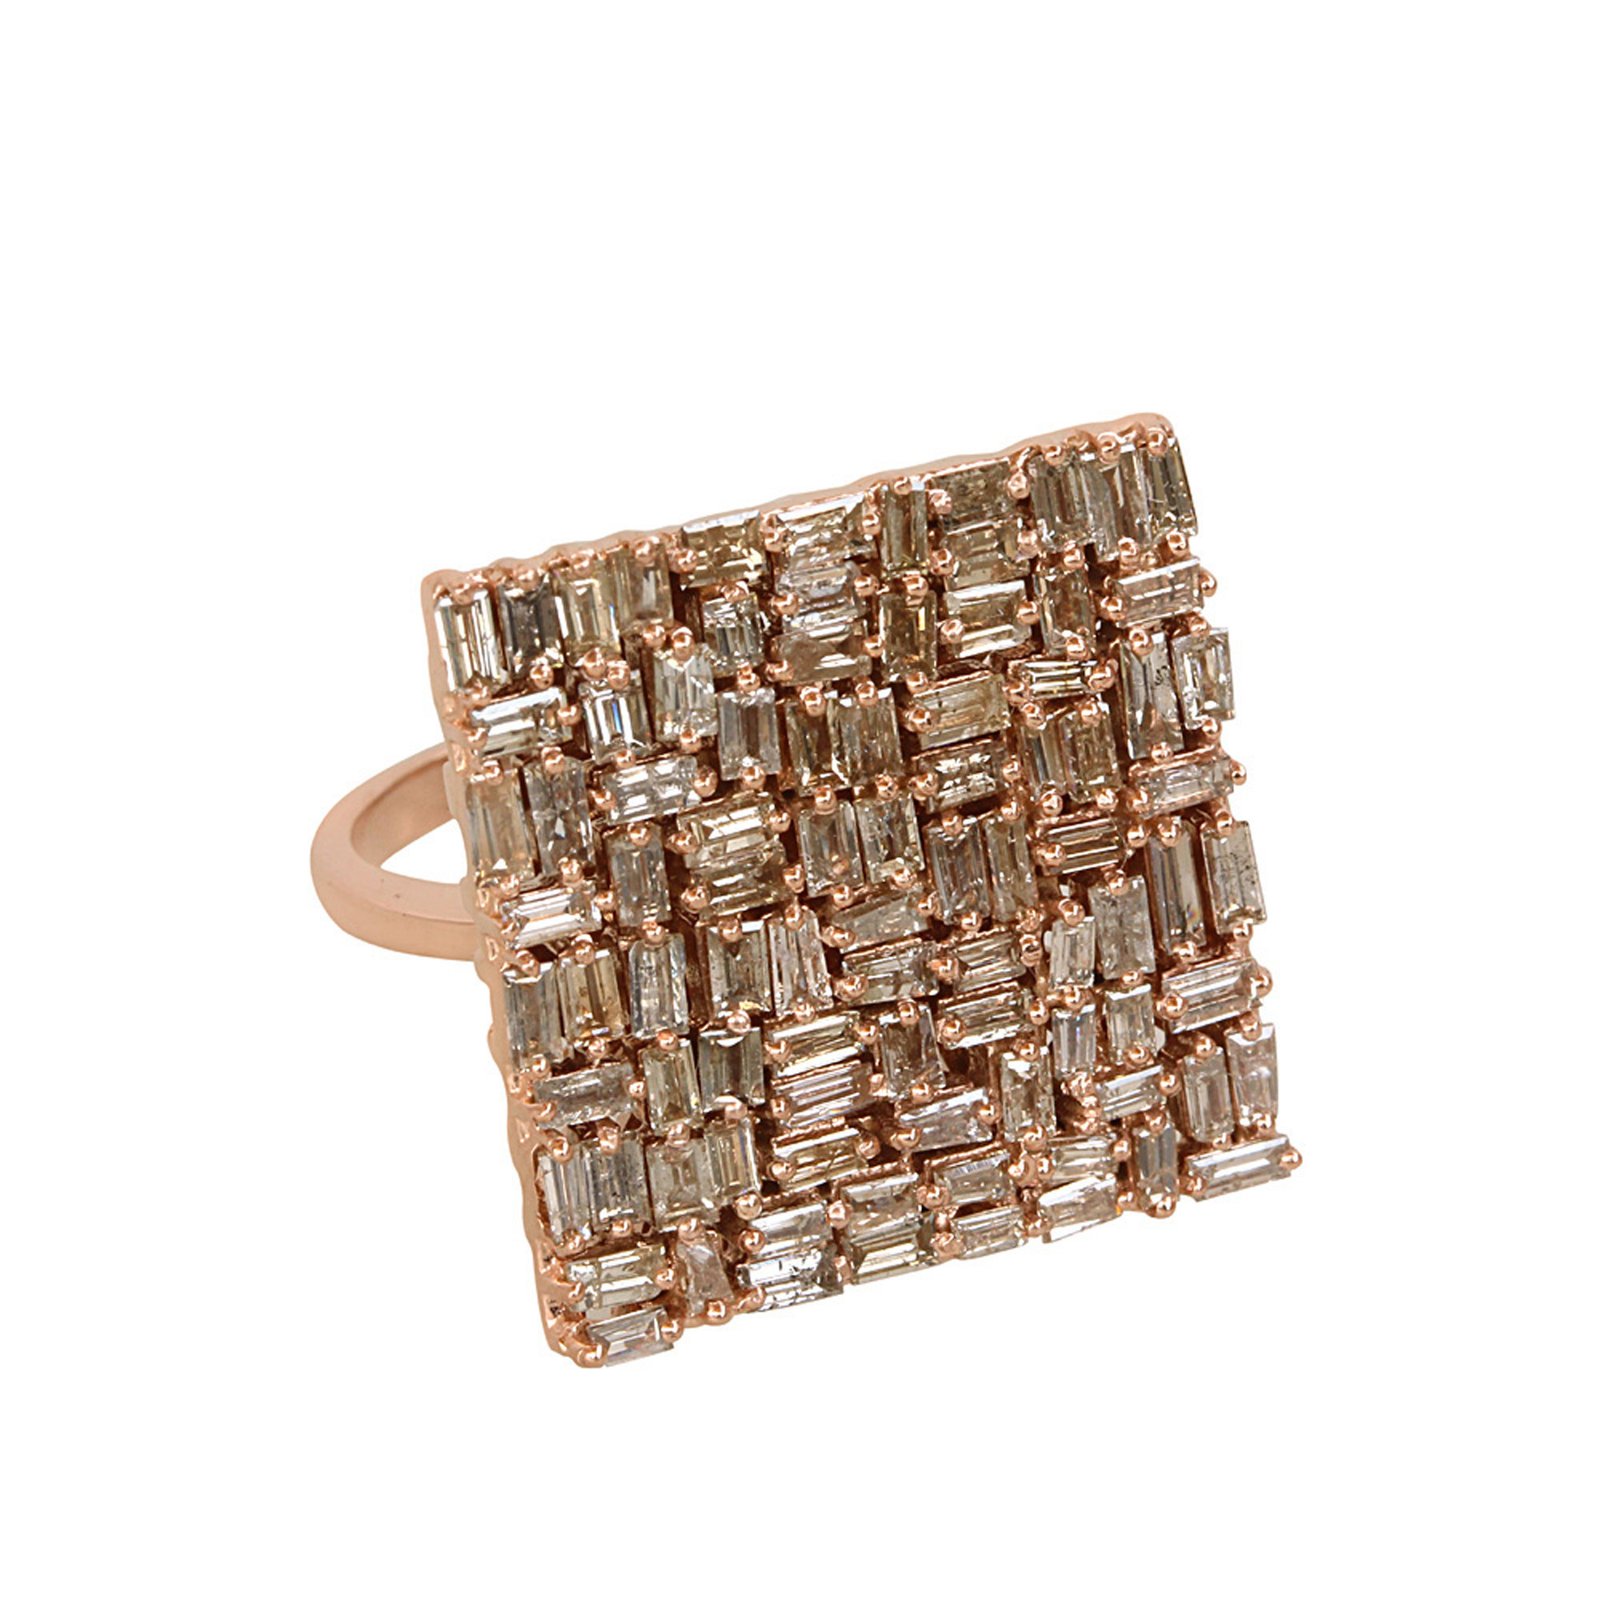 Square shape baguette diamond ring, 18k solid rose gold jewelry